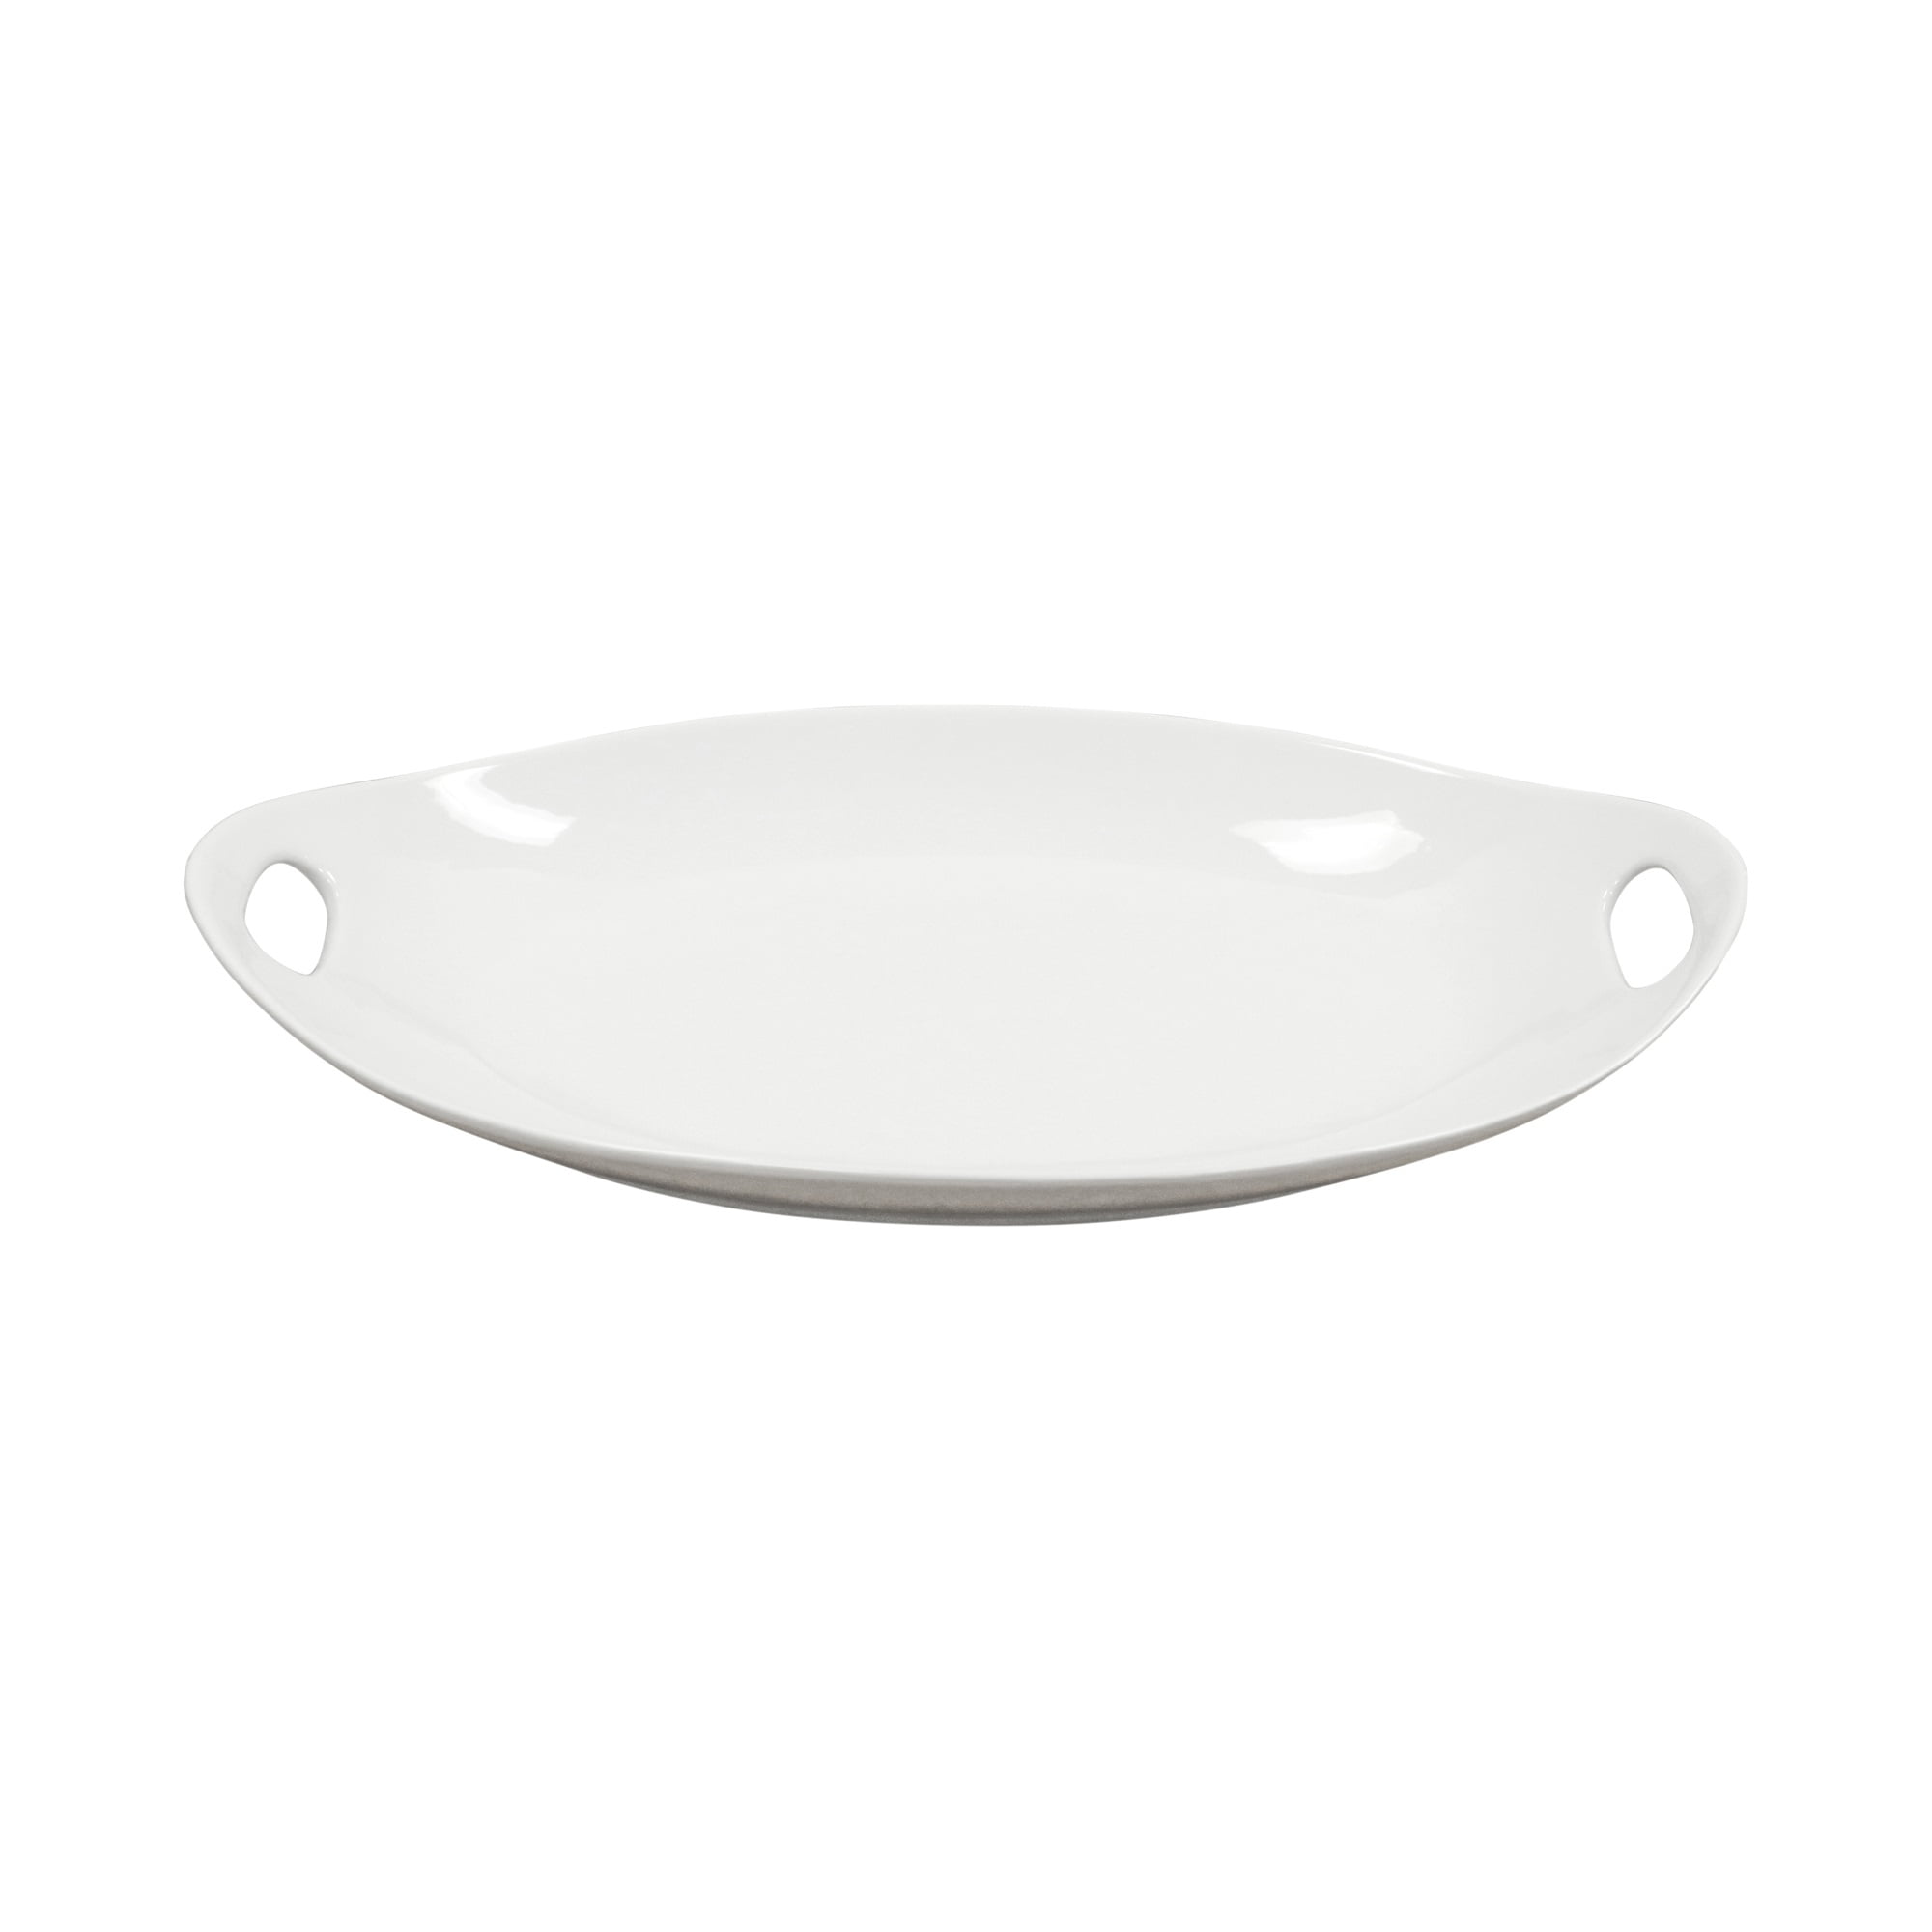 Better Homes & Gardens White Porcelain Tray with Handles